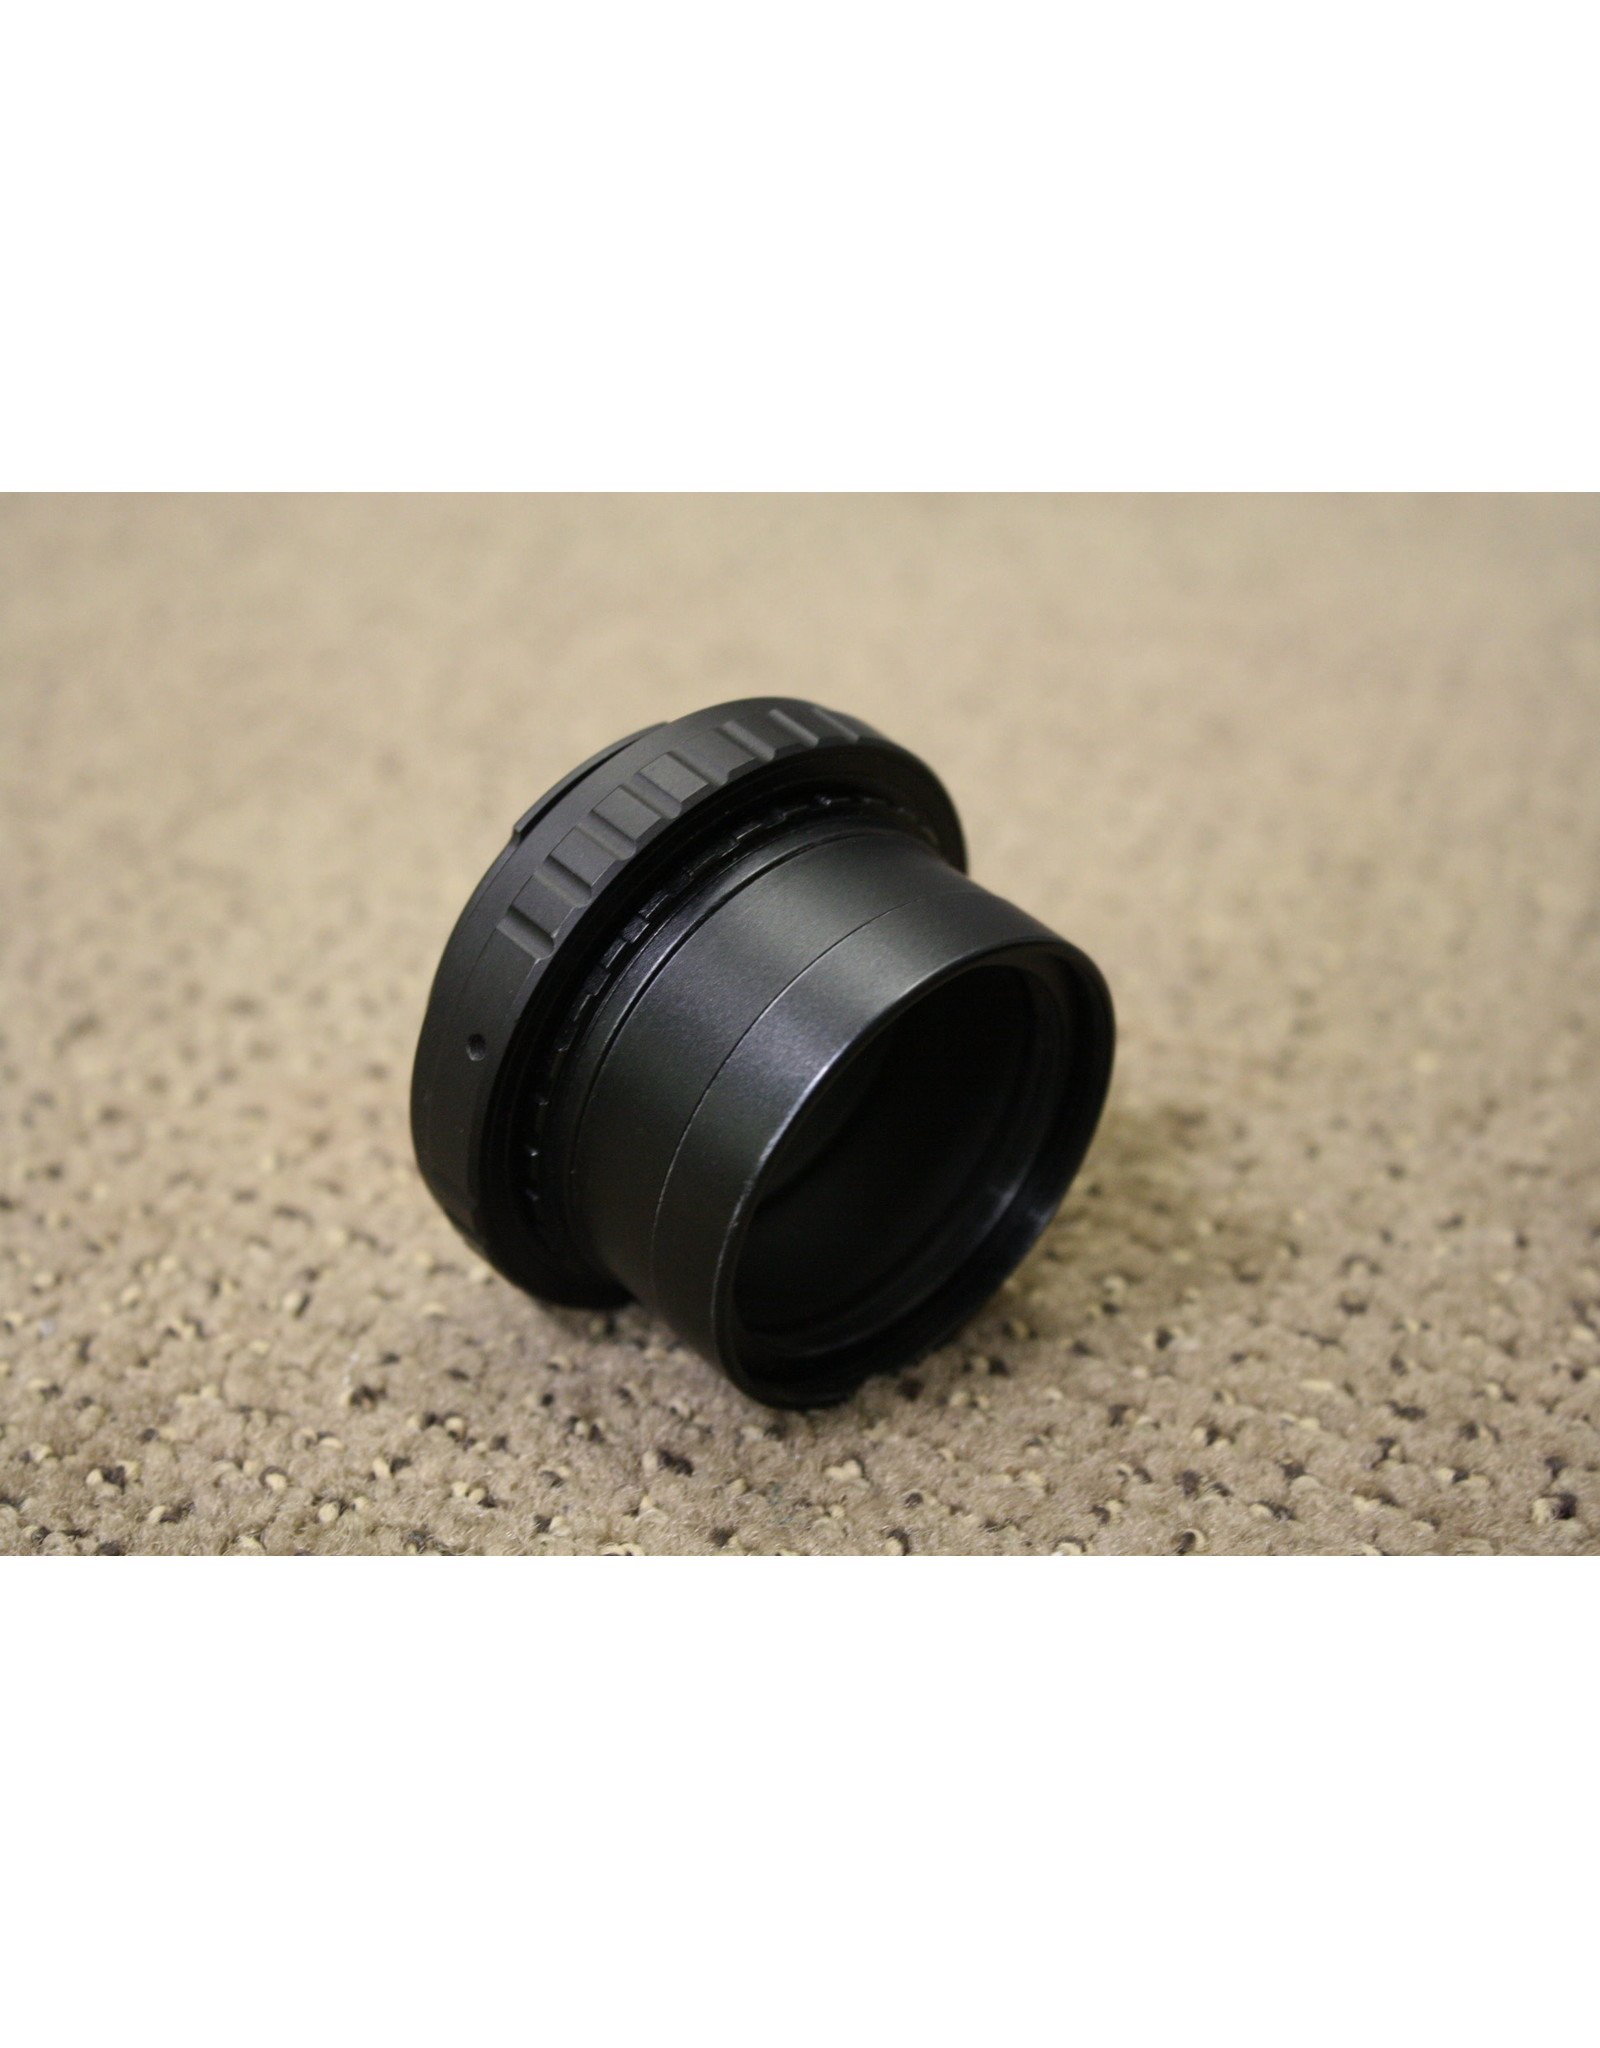 Arcturus 2 Inch Camera Adapter for Canon EOS (with built in female T and 48mm Thread)